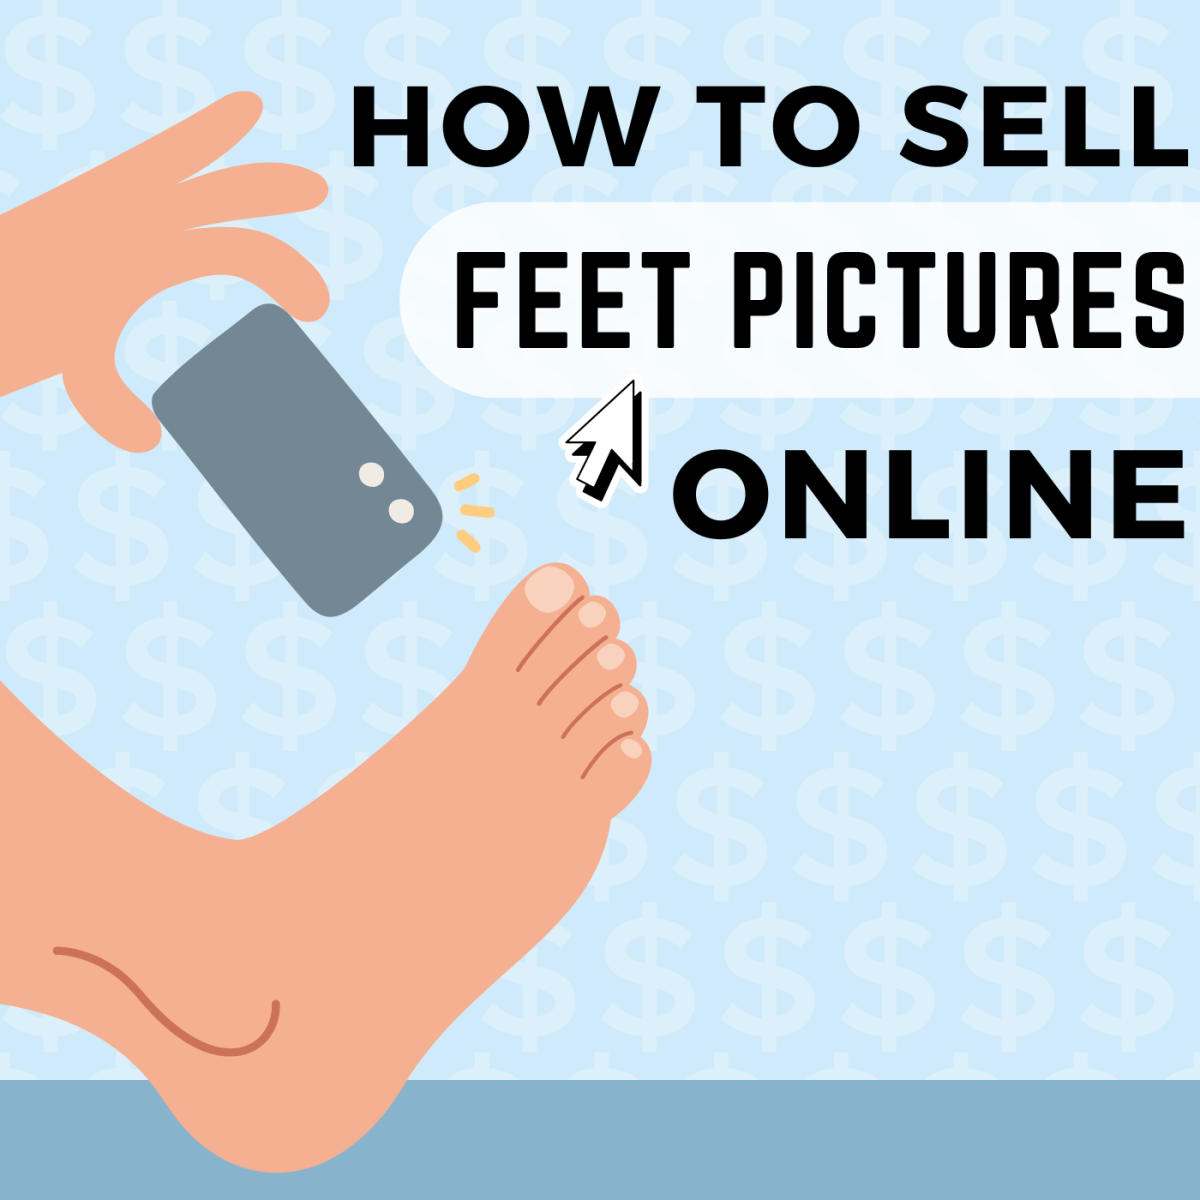 How to Sell Foot Pictures Online